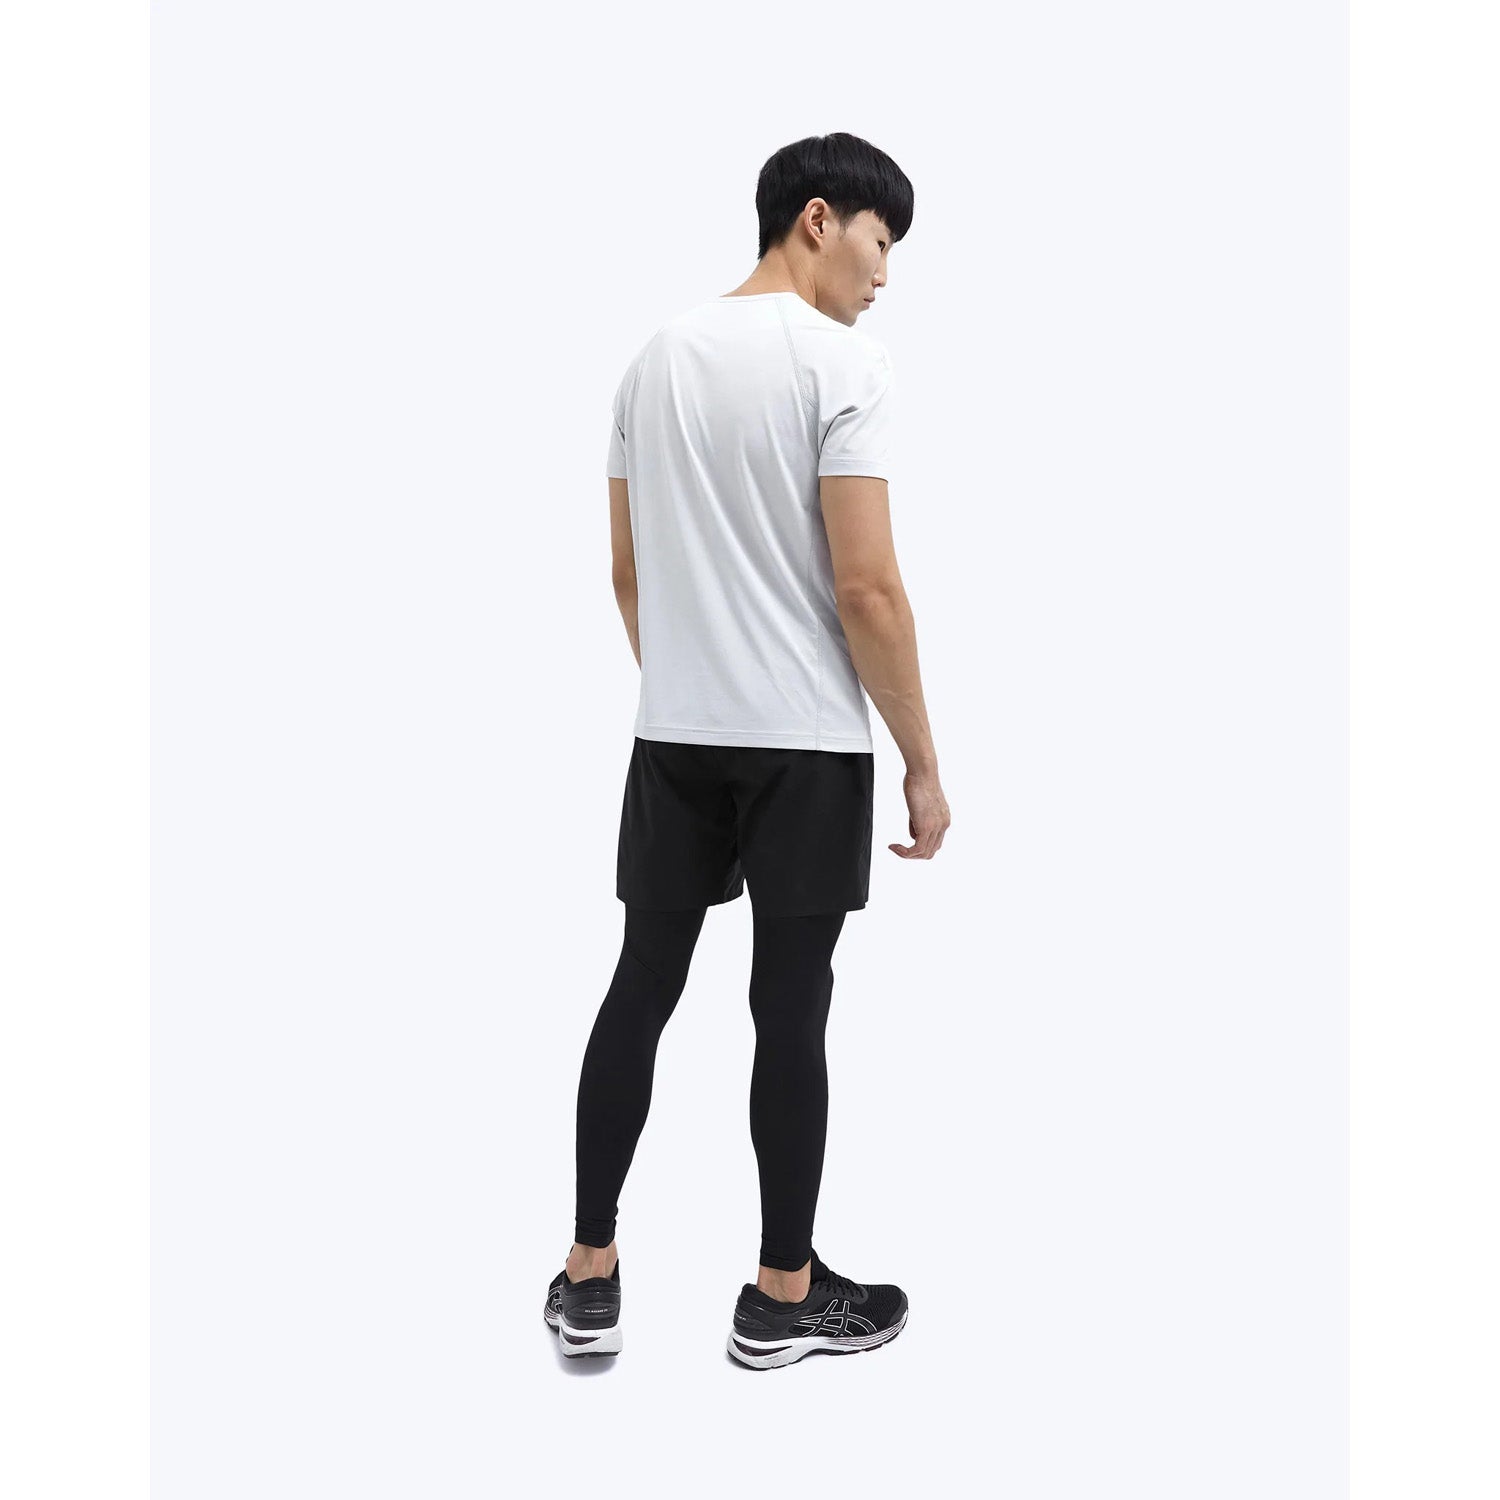 Reigning Champ Men Performance Tight Black RC-5328-BLK - BOTTOMS - Canada